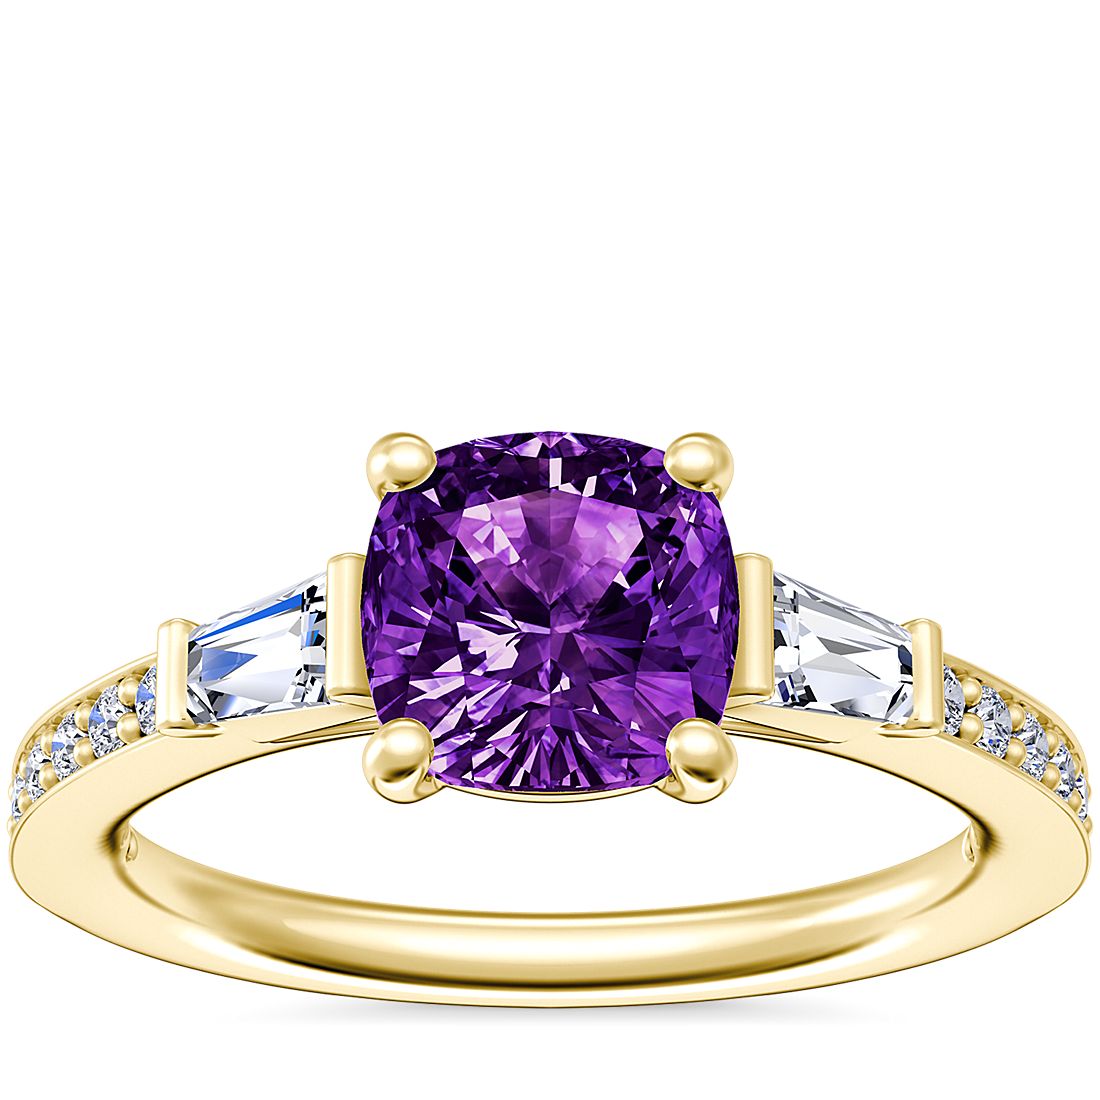 Tapered Baguette Diamond Cathedral Engagement Ring with Cushion Amethyst in 14k Yellow Gold (6.5mm)